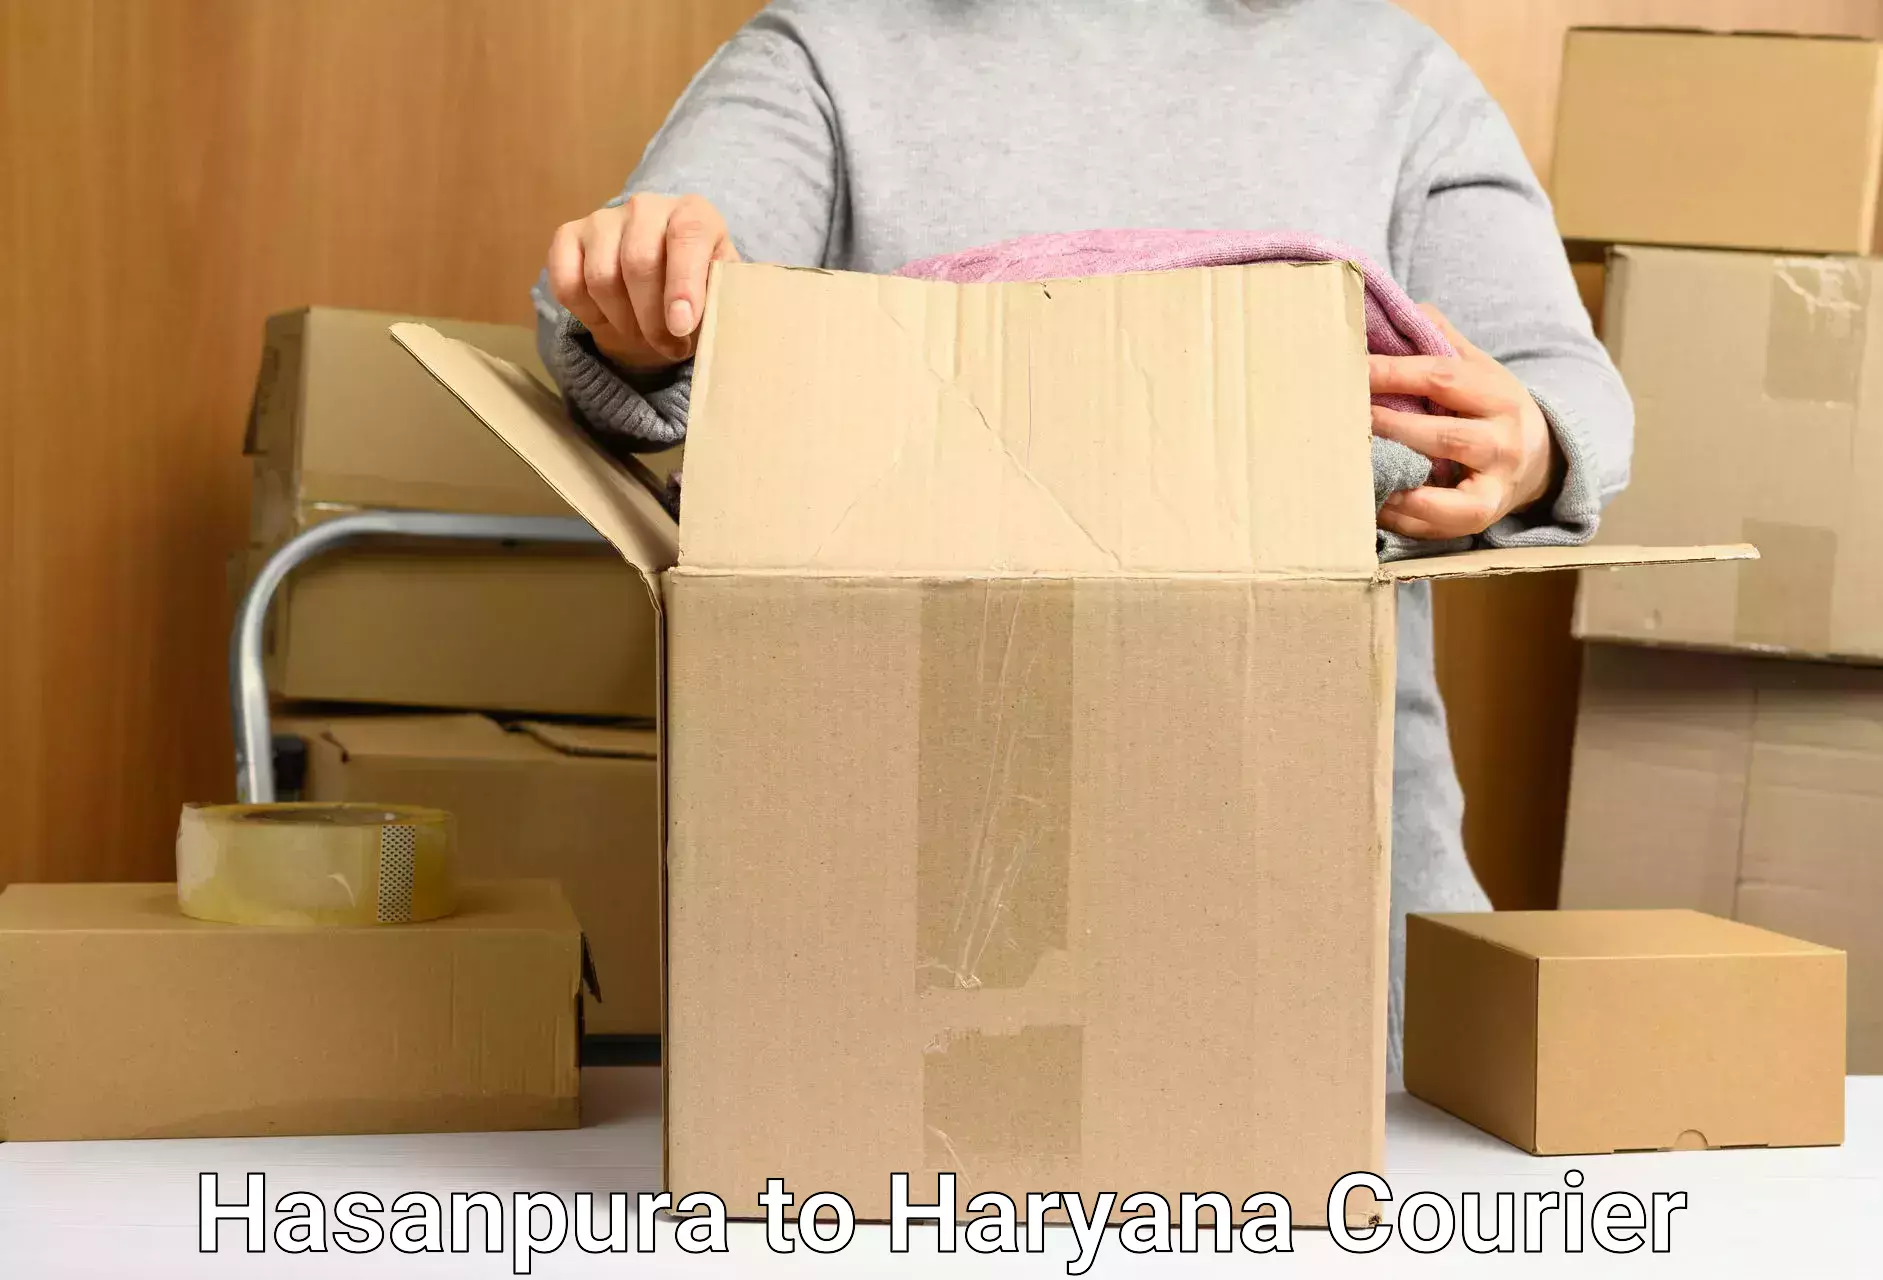 Express mail solutions in Hasanpura to NCR Haryana